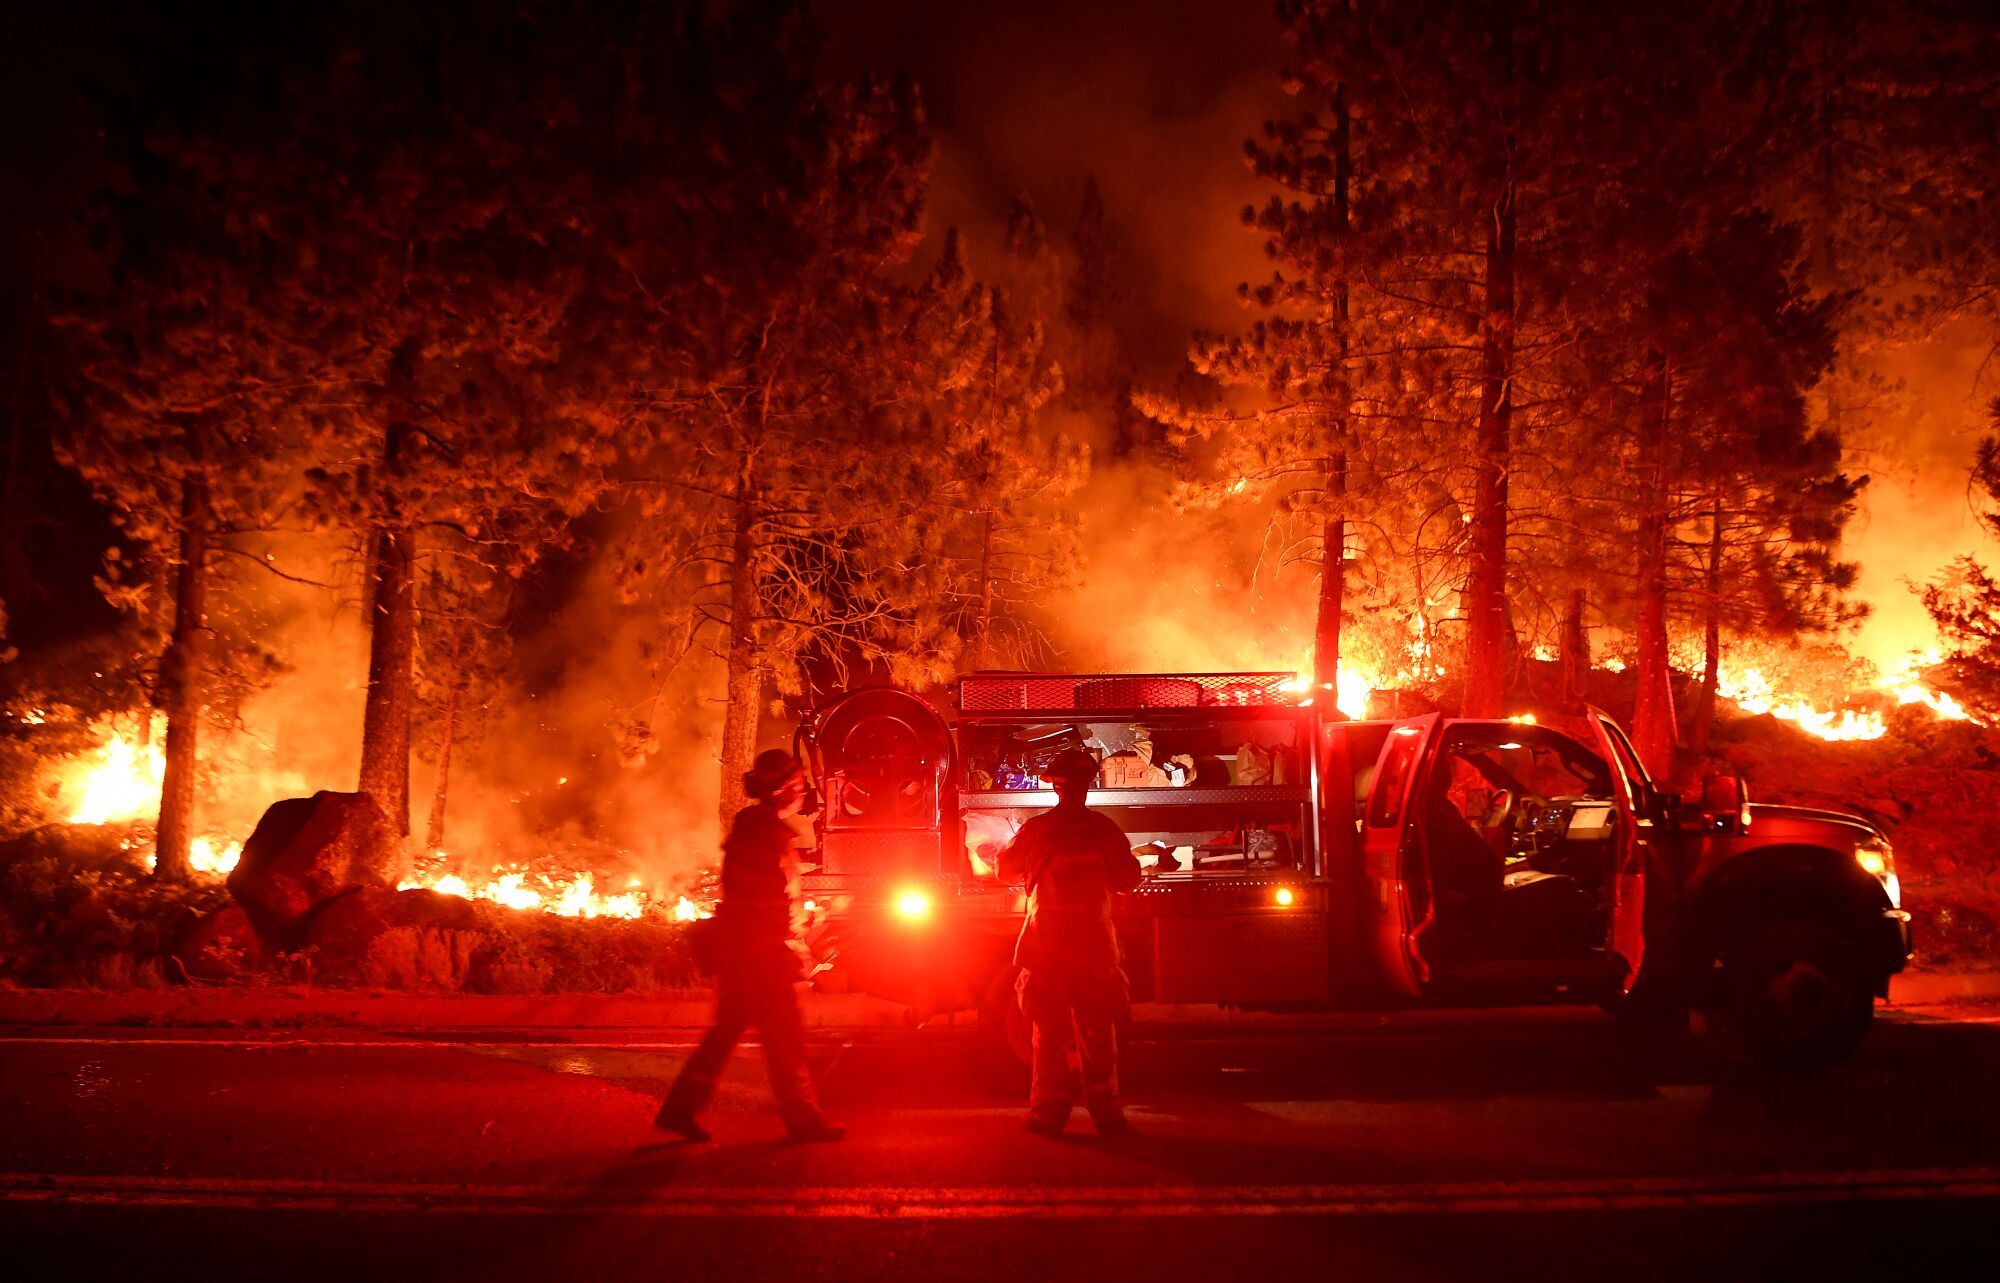 By Thursday afternoon, the fire had scorched more than 210,000 acres.